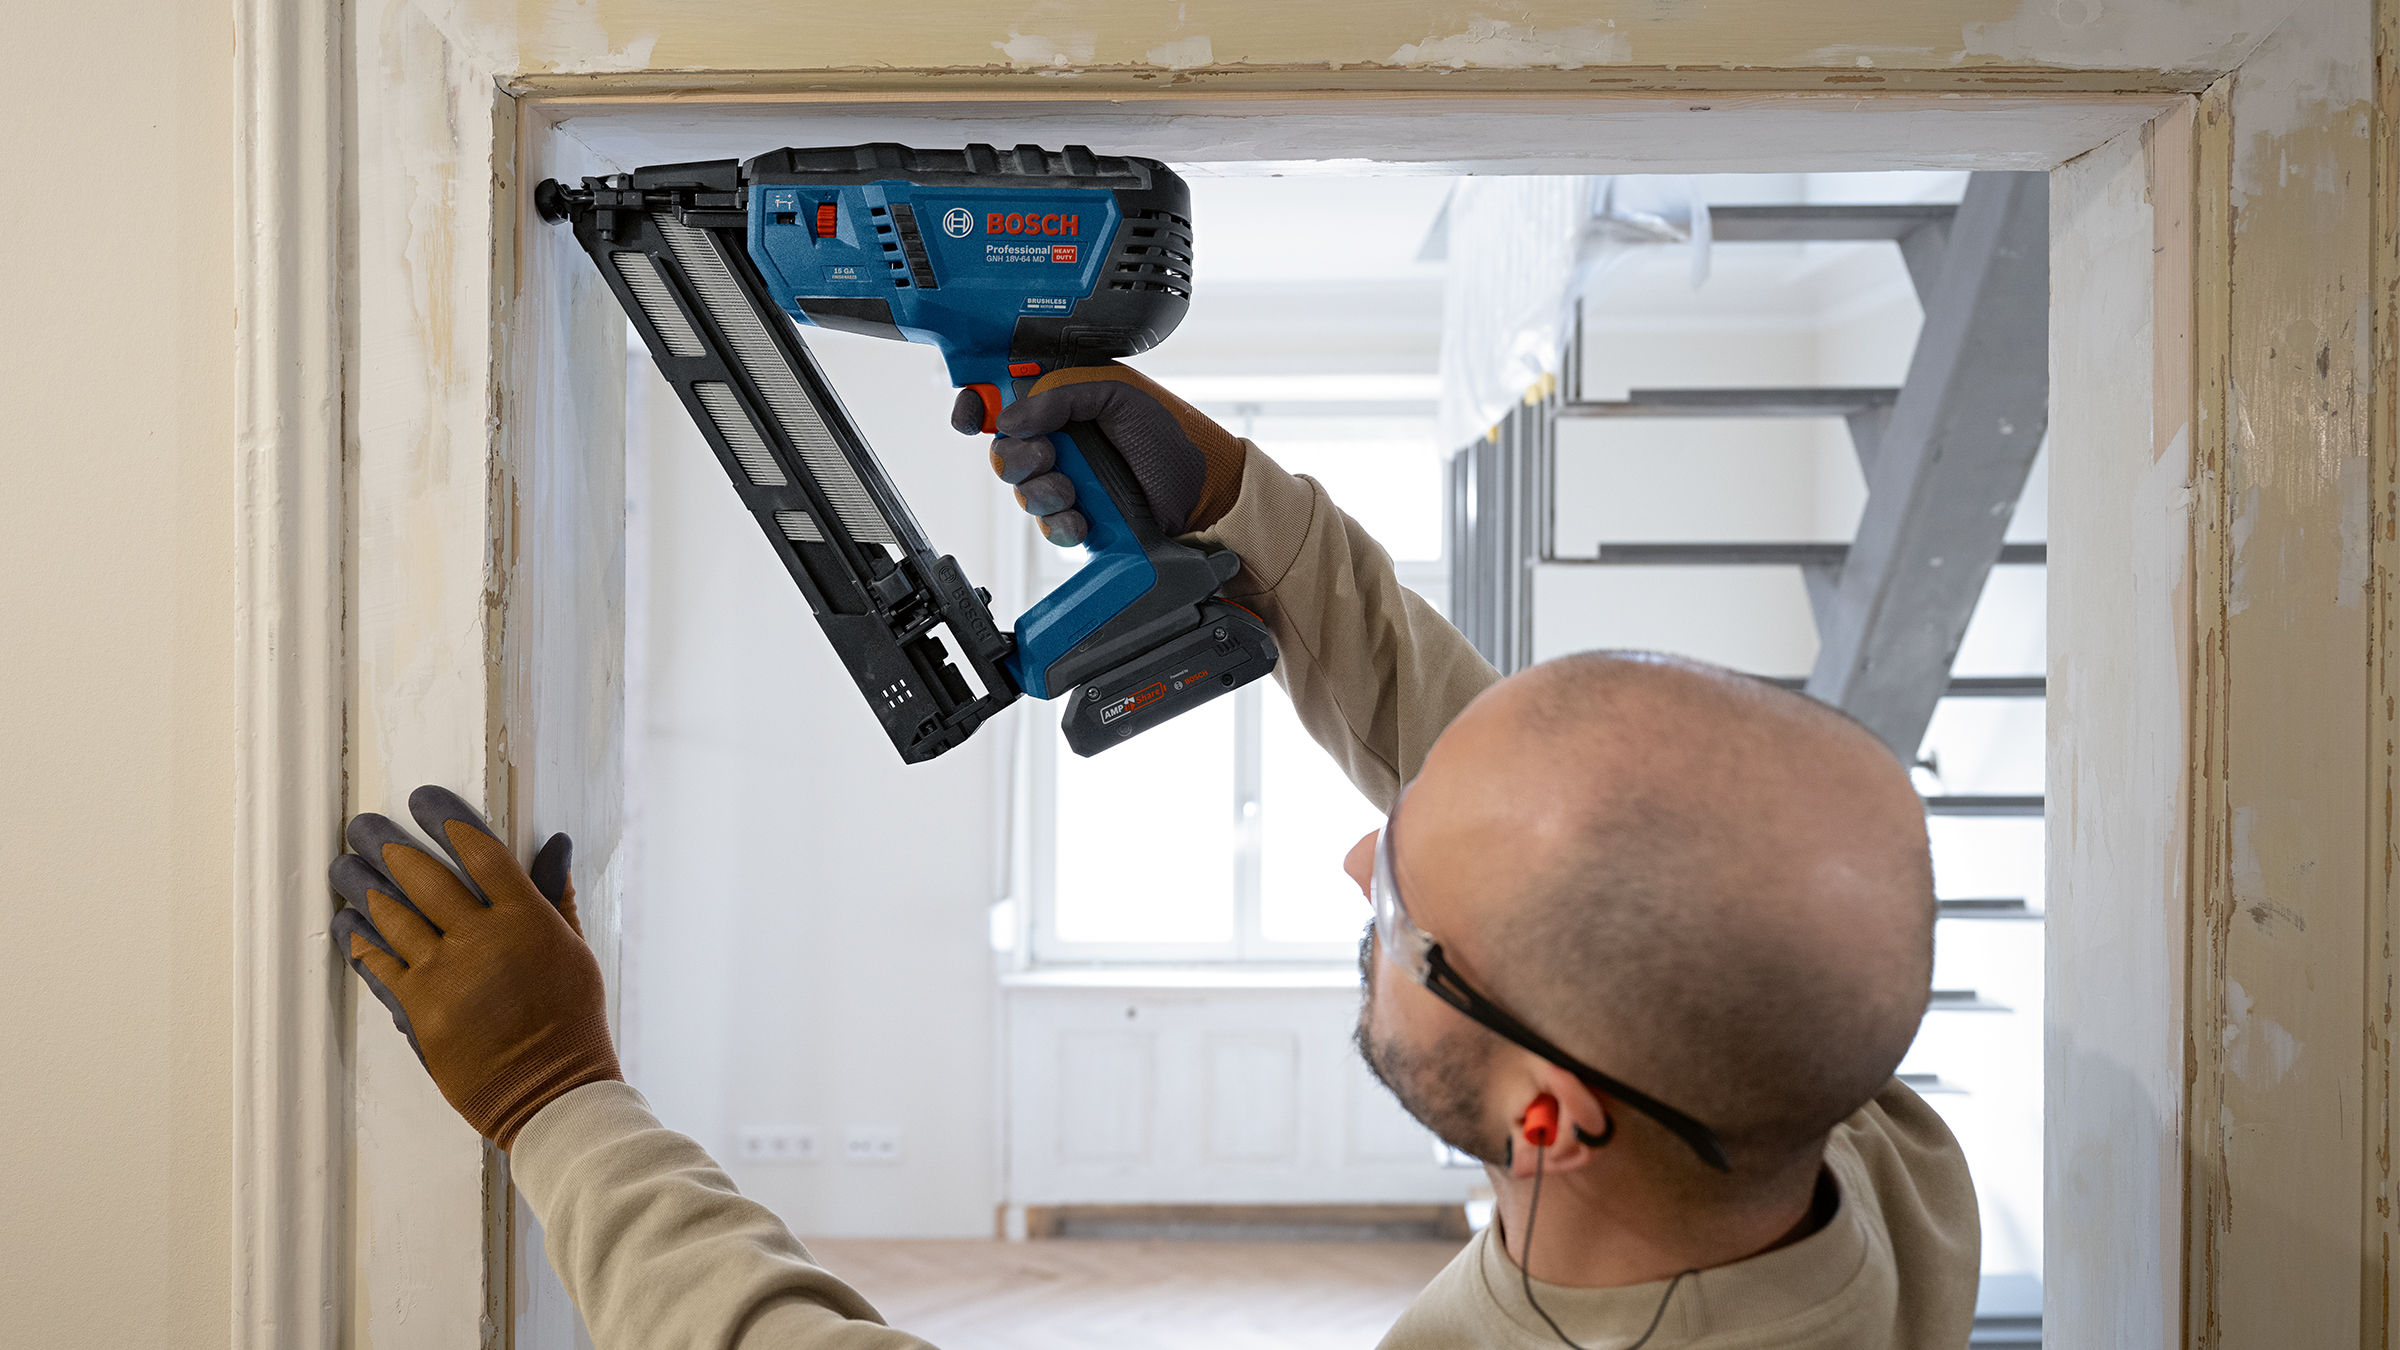 Offers the highest fastening power in the range: Bosch cordless nail gun GNH 18V-64 MD Professional